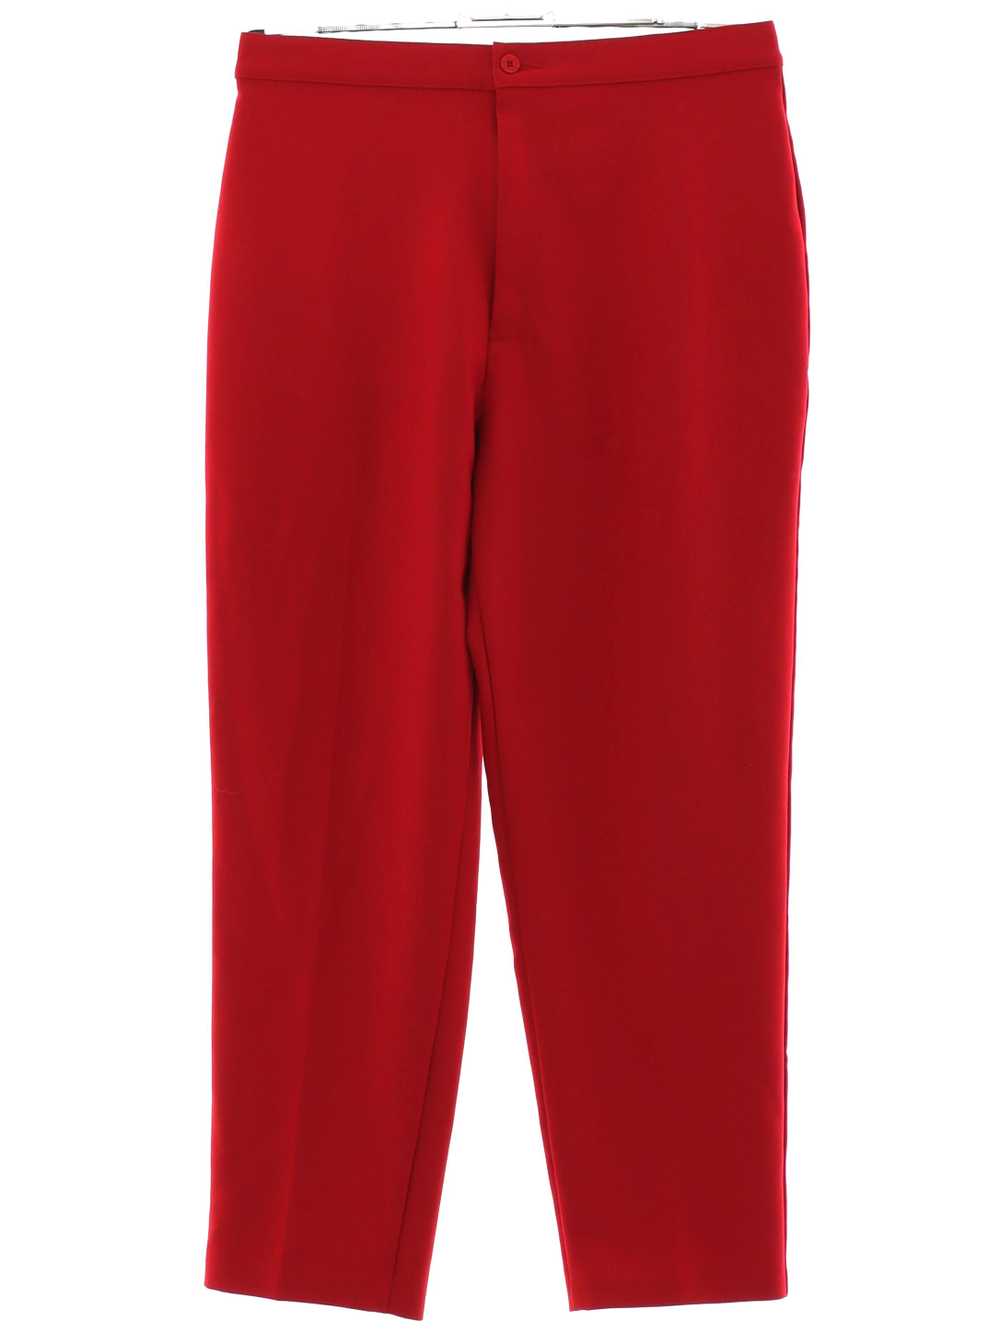 1980's Bend Over Womens Knit Pants - image 1